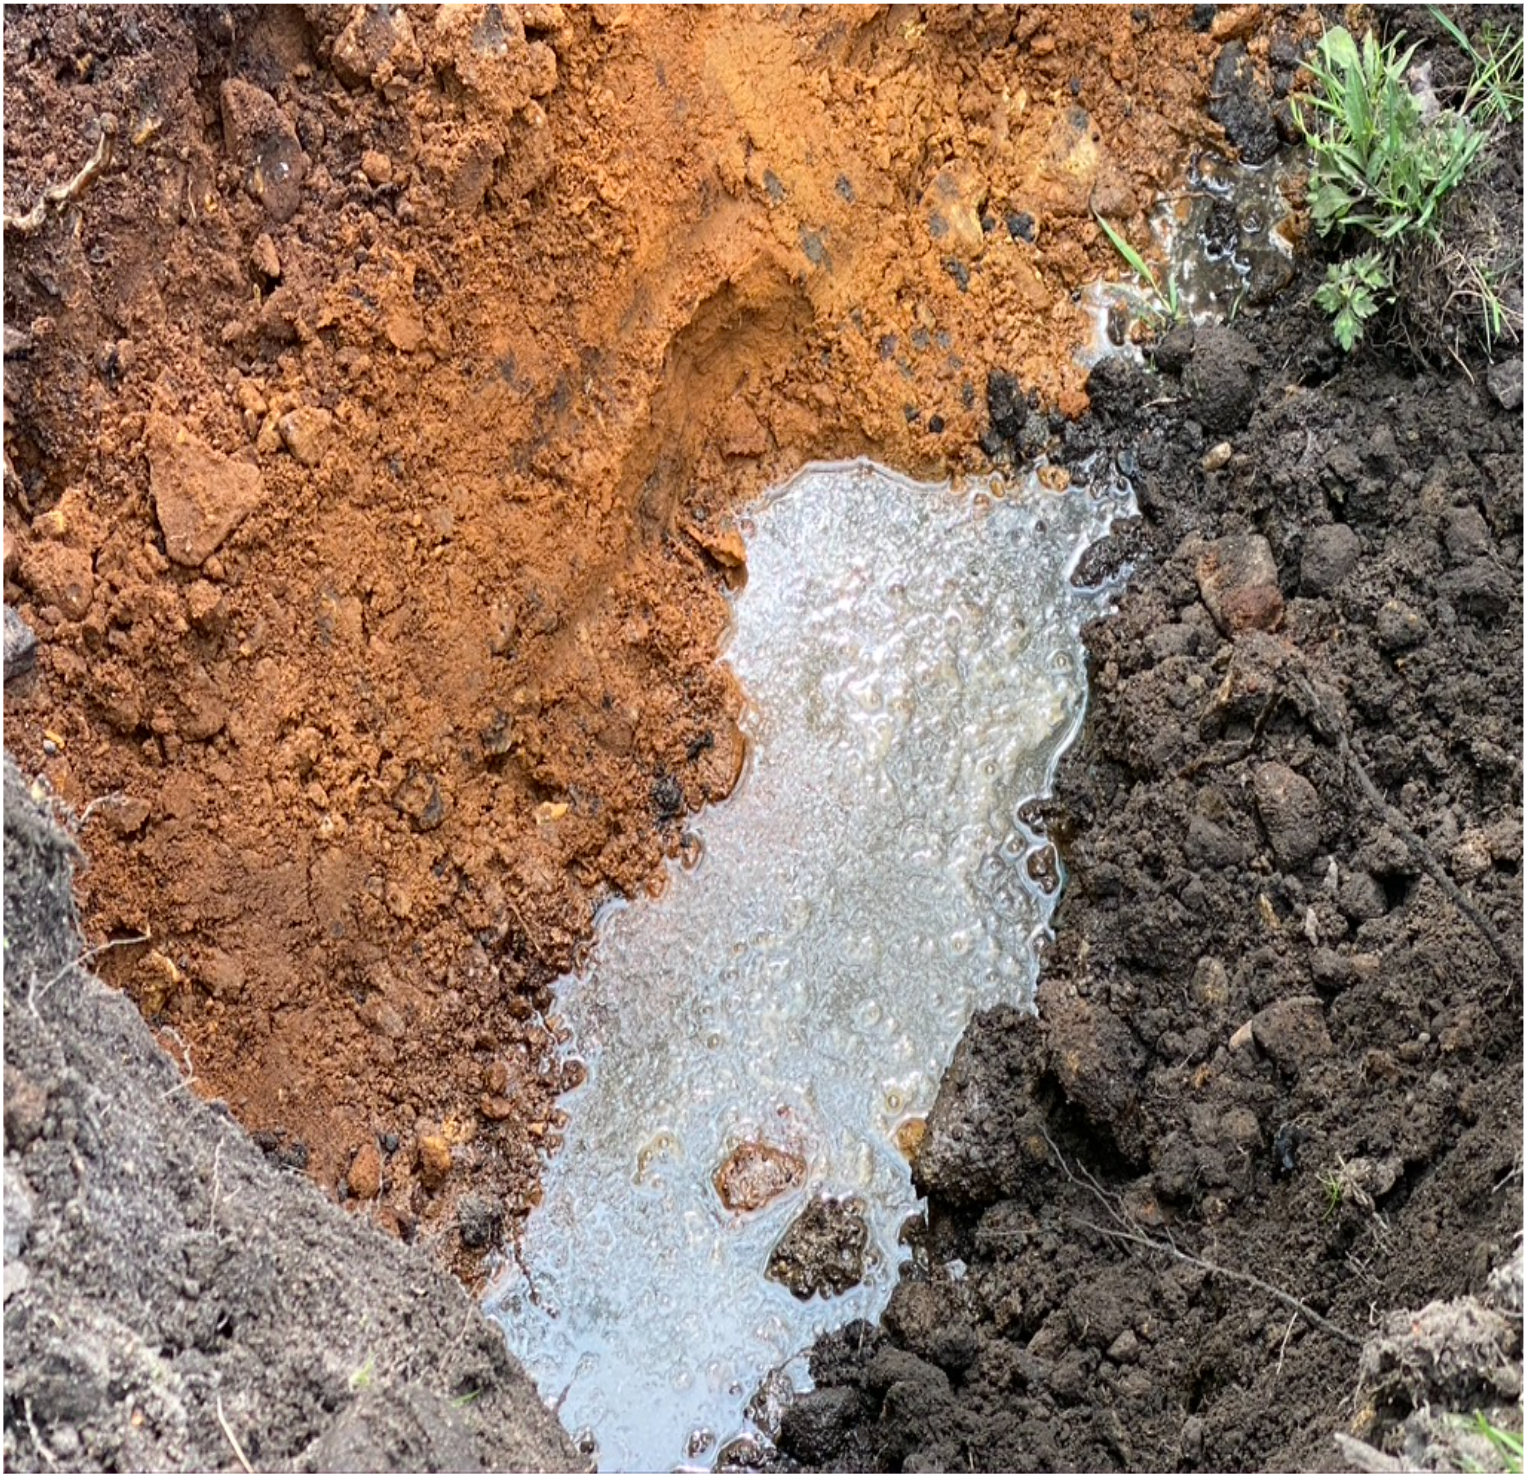 Blackened soil from grease and fat through a drainage field.